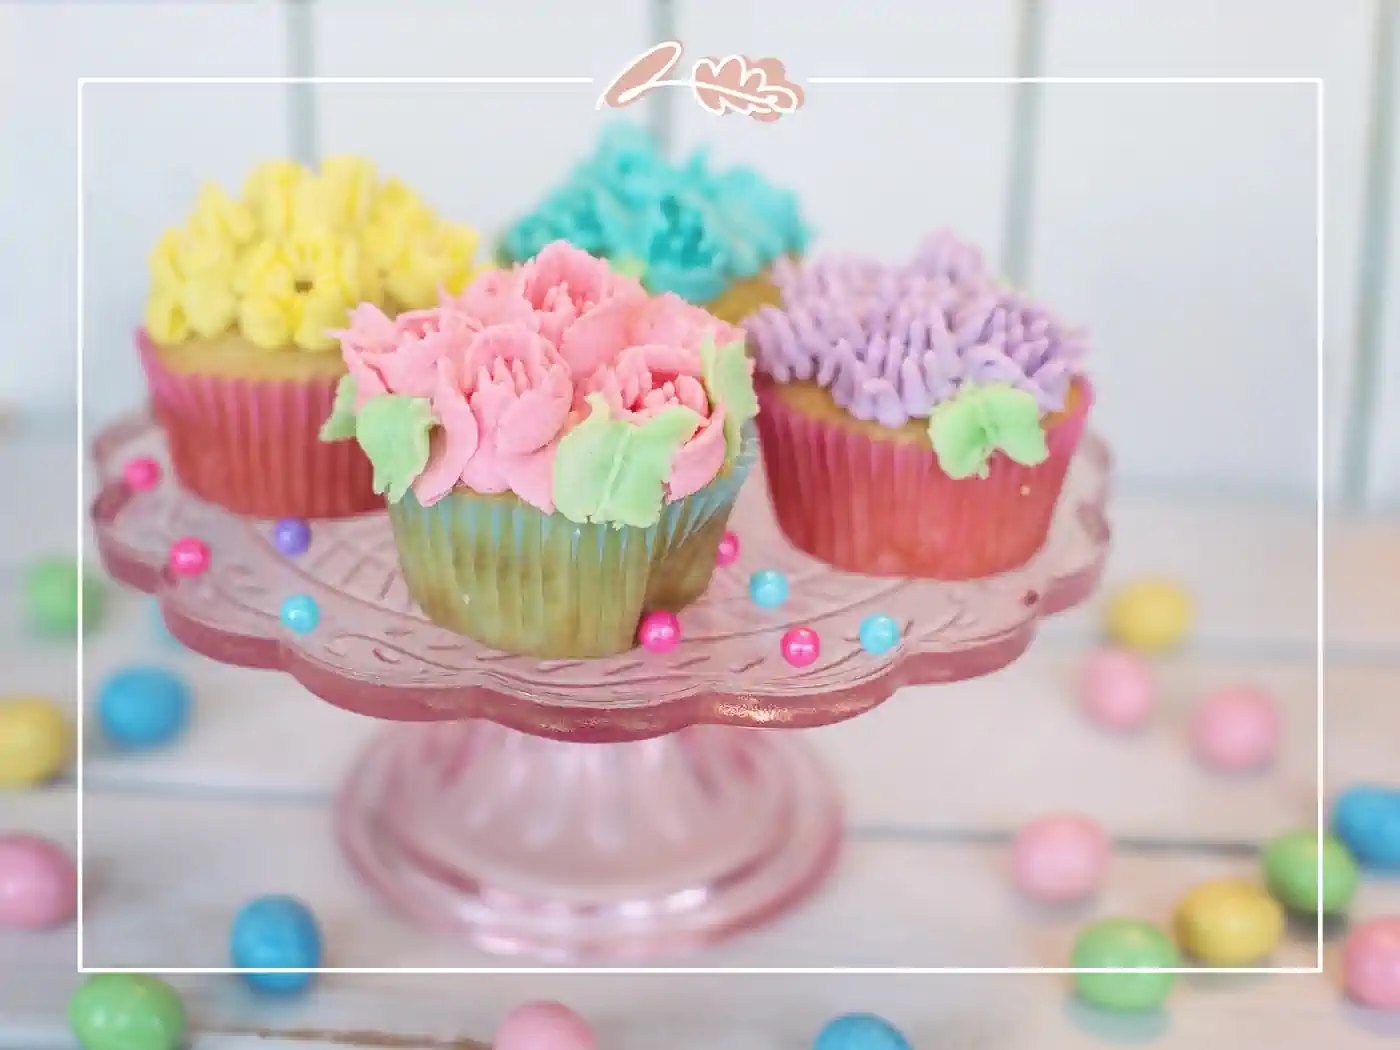 A display of colorful cupcakes adorned with intricate floral icing on a pink cake stand. Fabulous Flowers and Gifts - Birthday Collection.